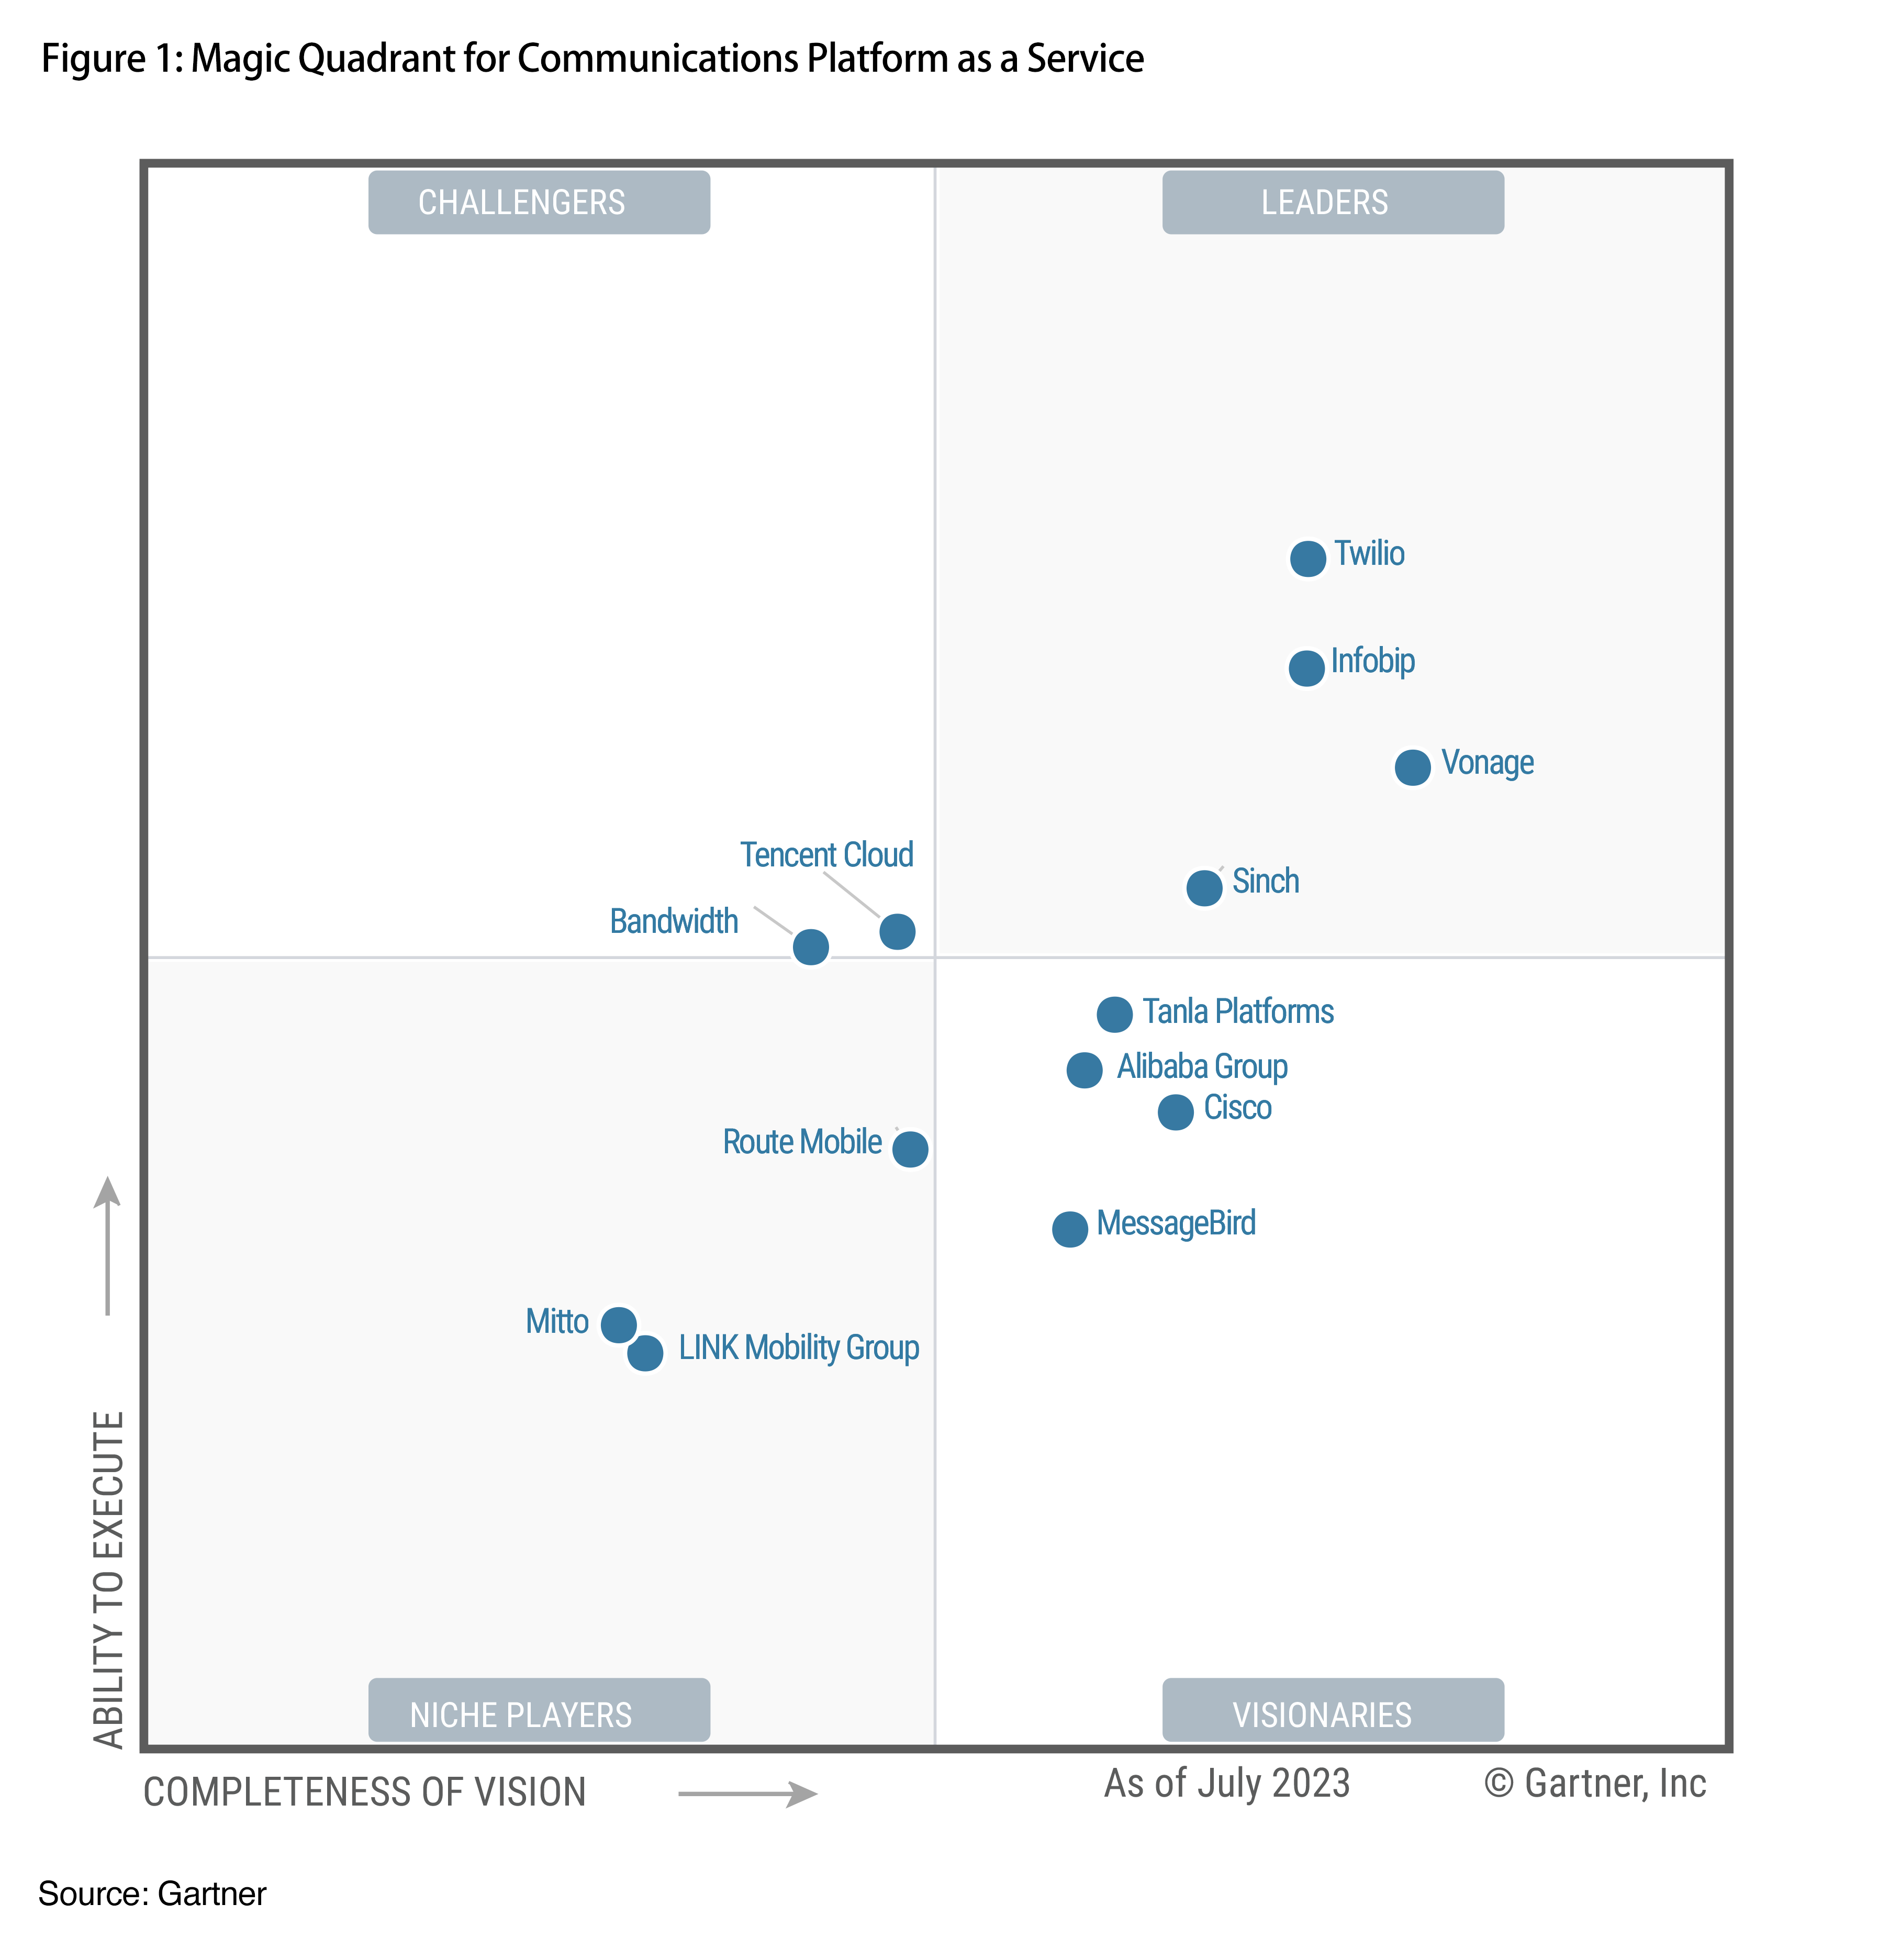 Positioned highest for ability to execute in the 2023 Gartner Magic Quadrant for CPaaS